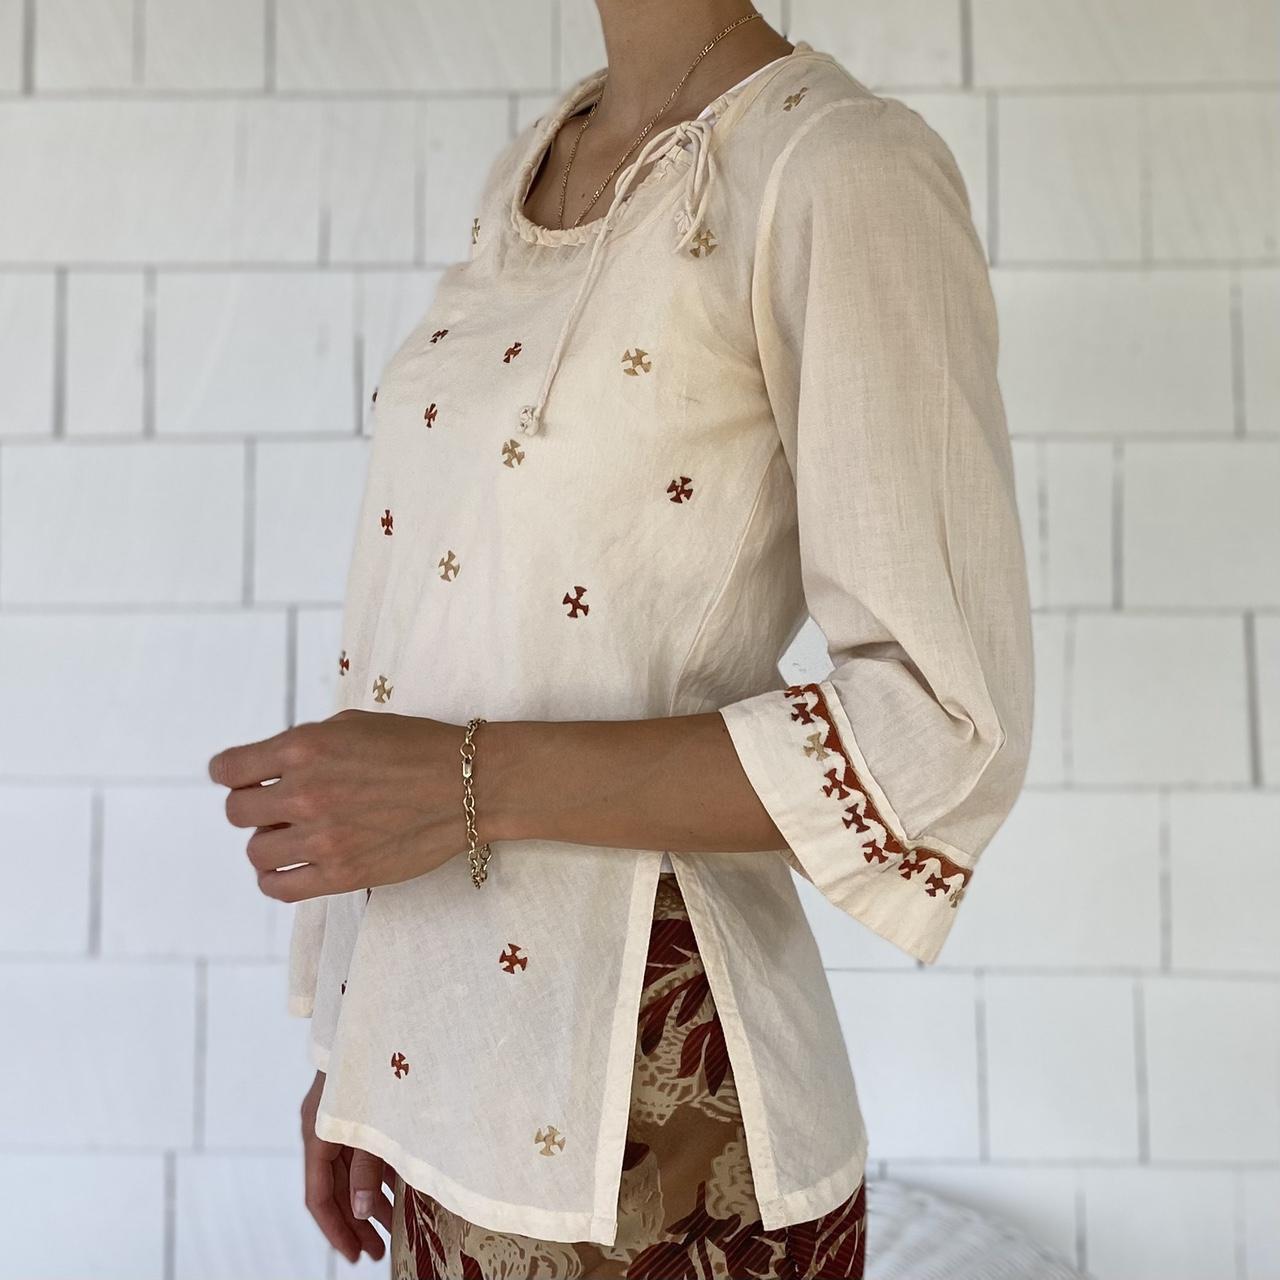 ANOKHI Women's Cream and Brown Blouse (2)